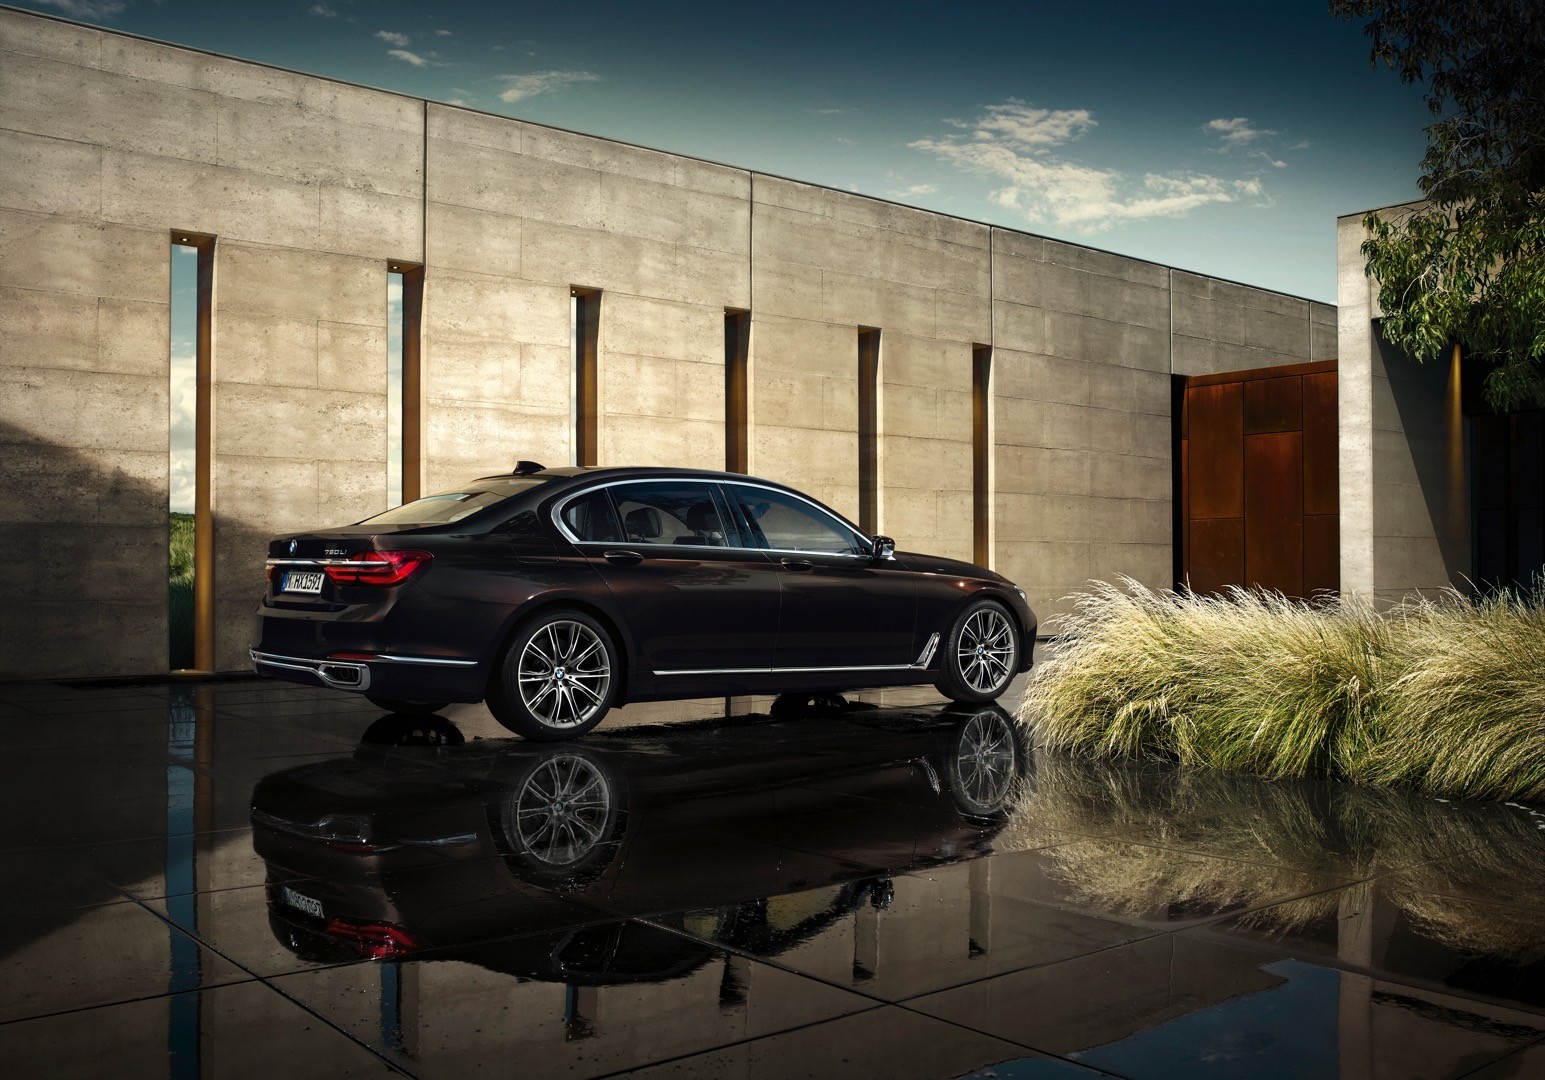 2016-bmw-7-series-finally-officially-unveiled-the-good-stuffs-inside-photo-gallery_129